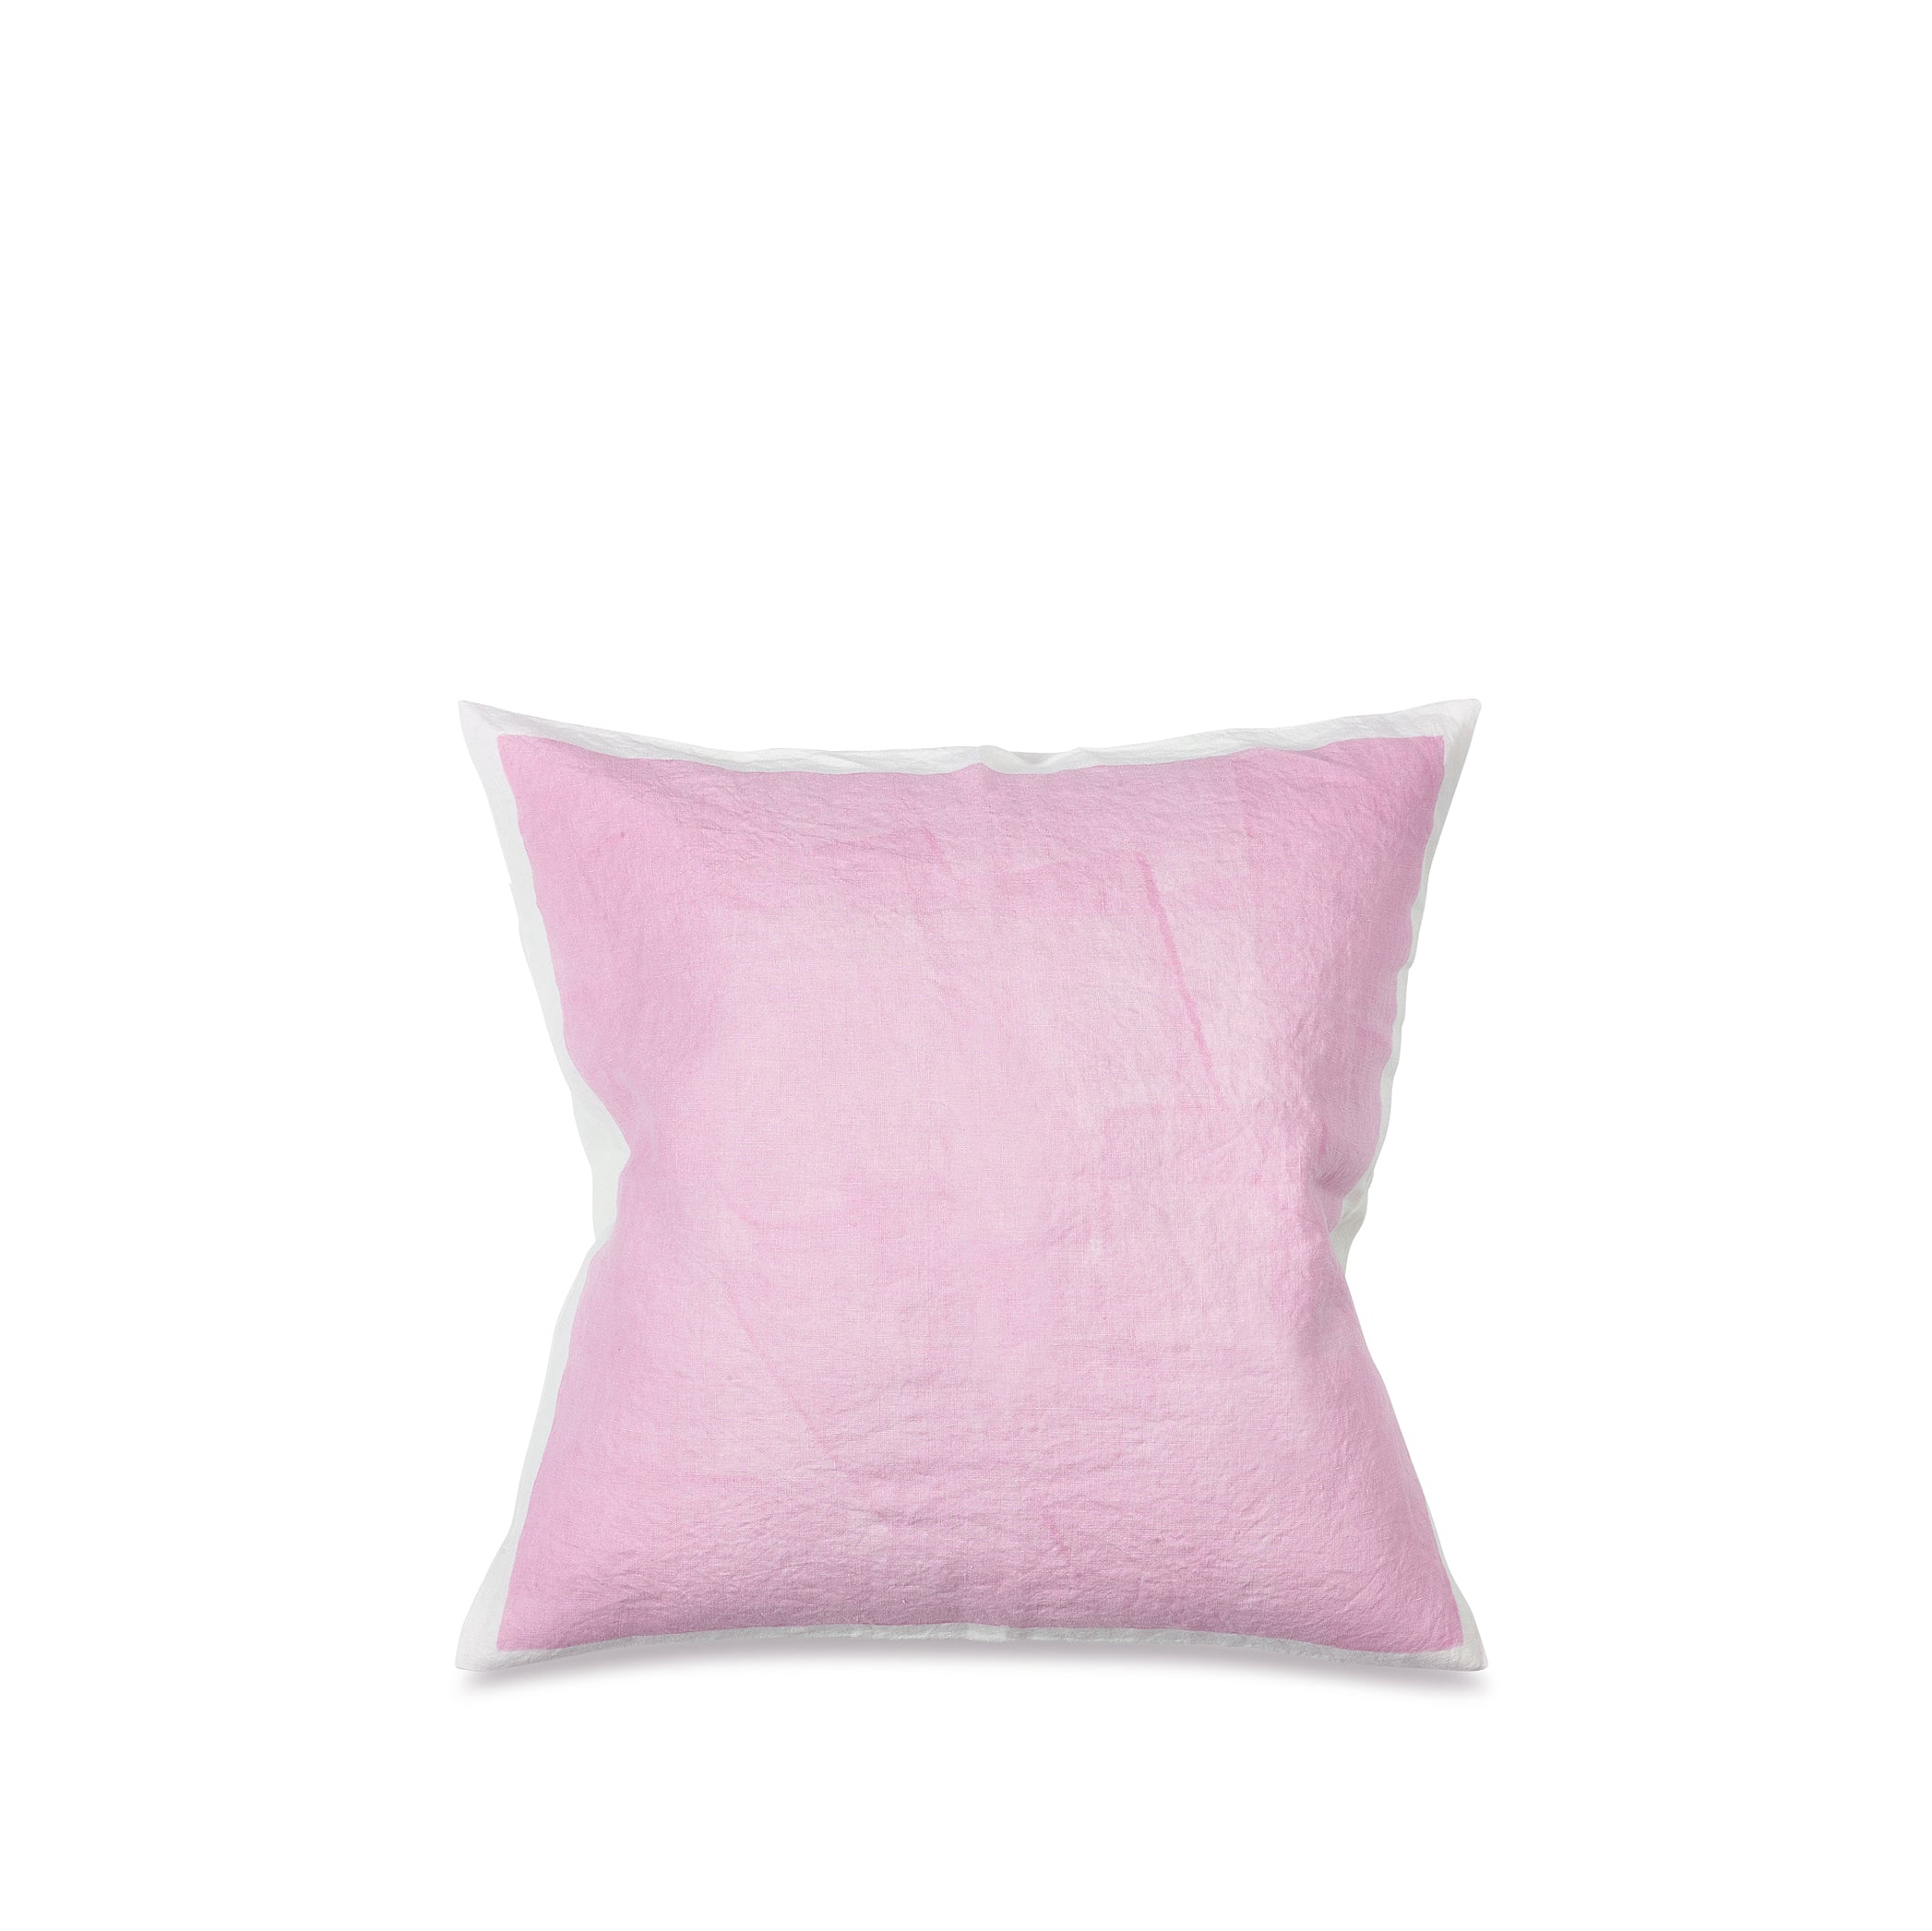 Hand Painted Linen Cushion in Pale Pink, 50cm x 50cm